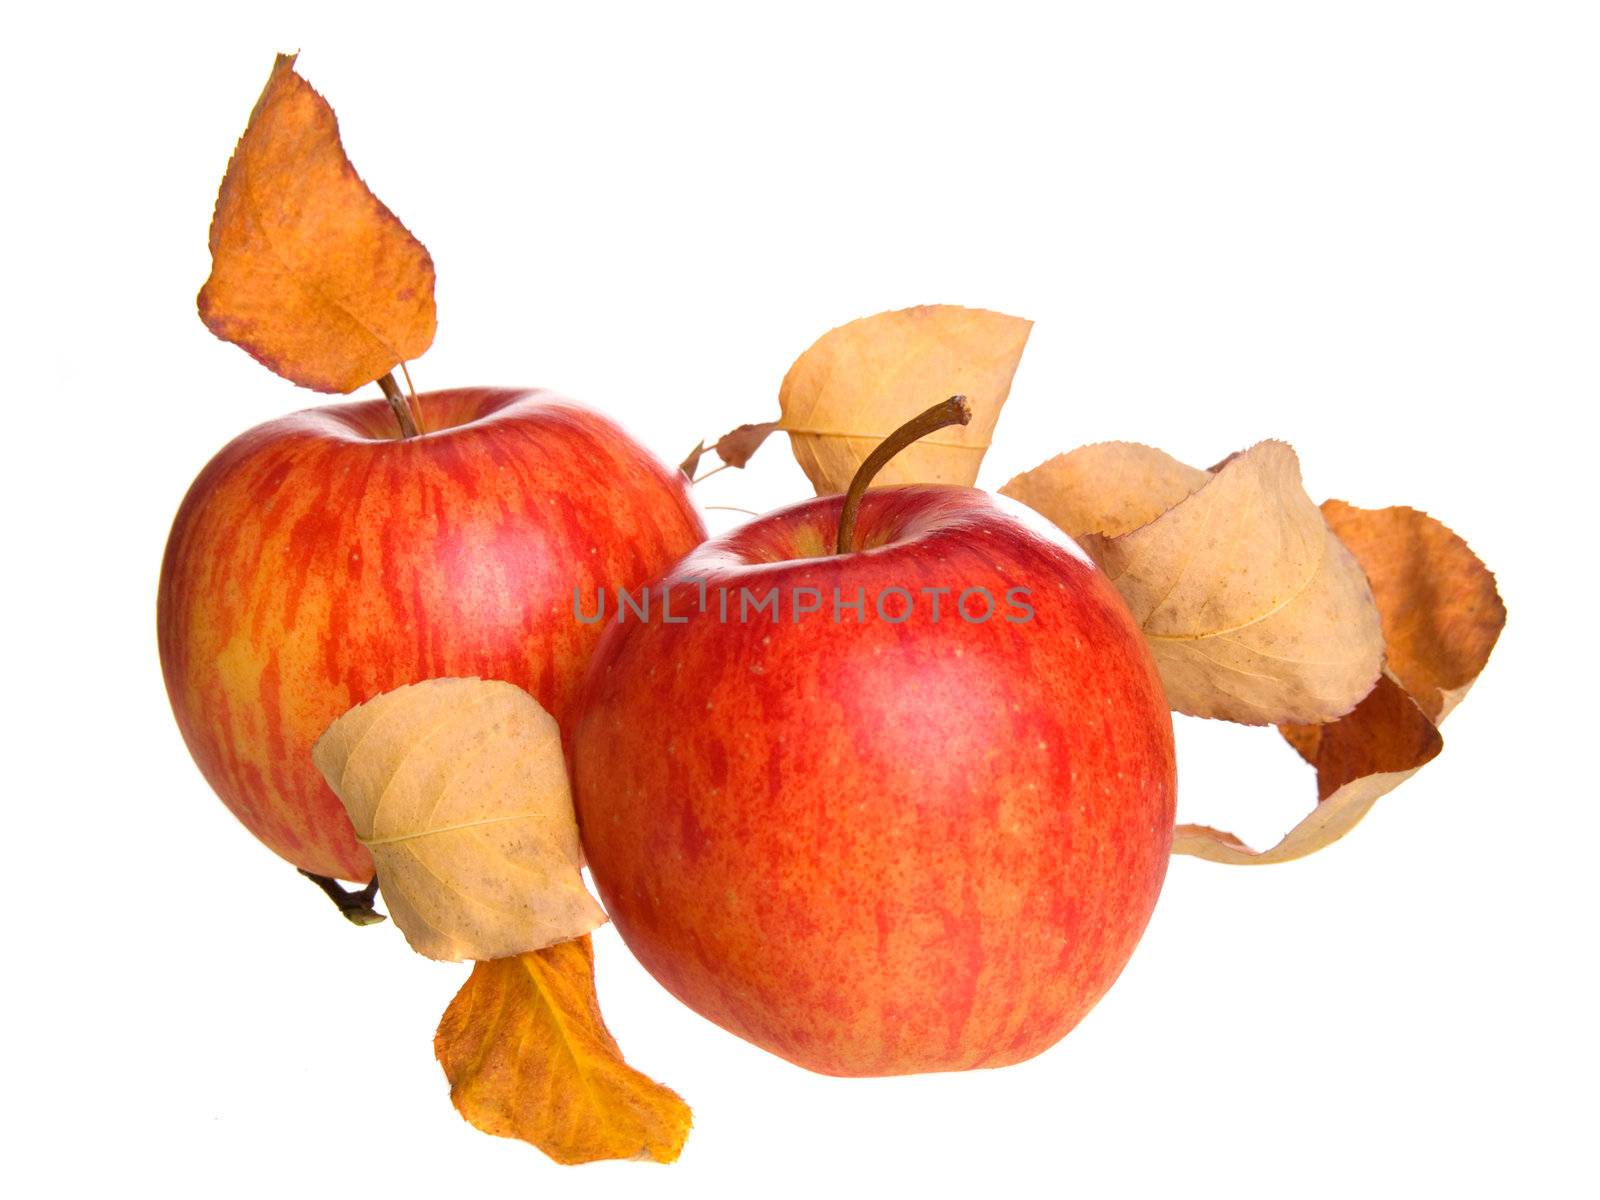 two apple on white background  by motorolka